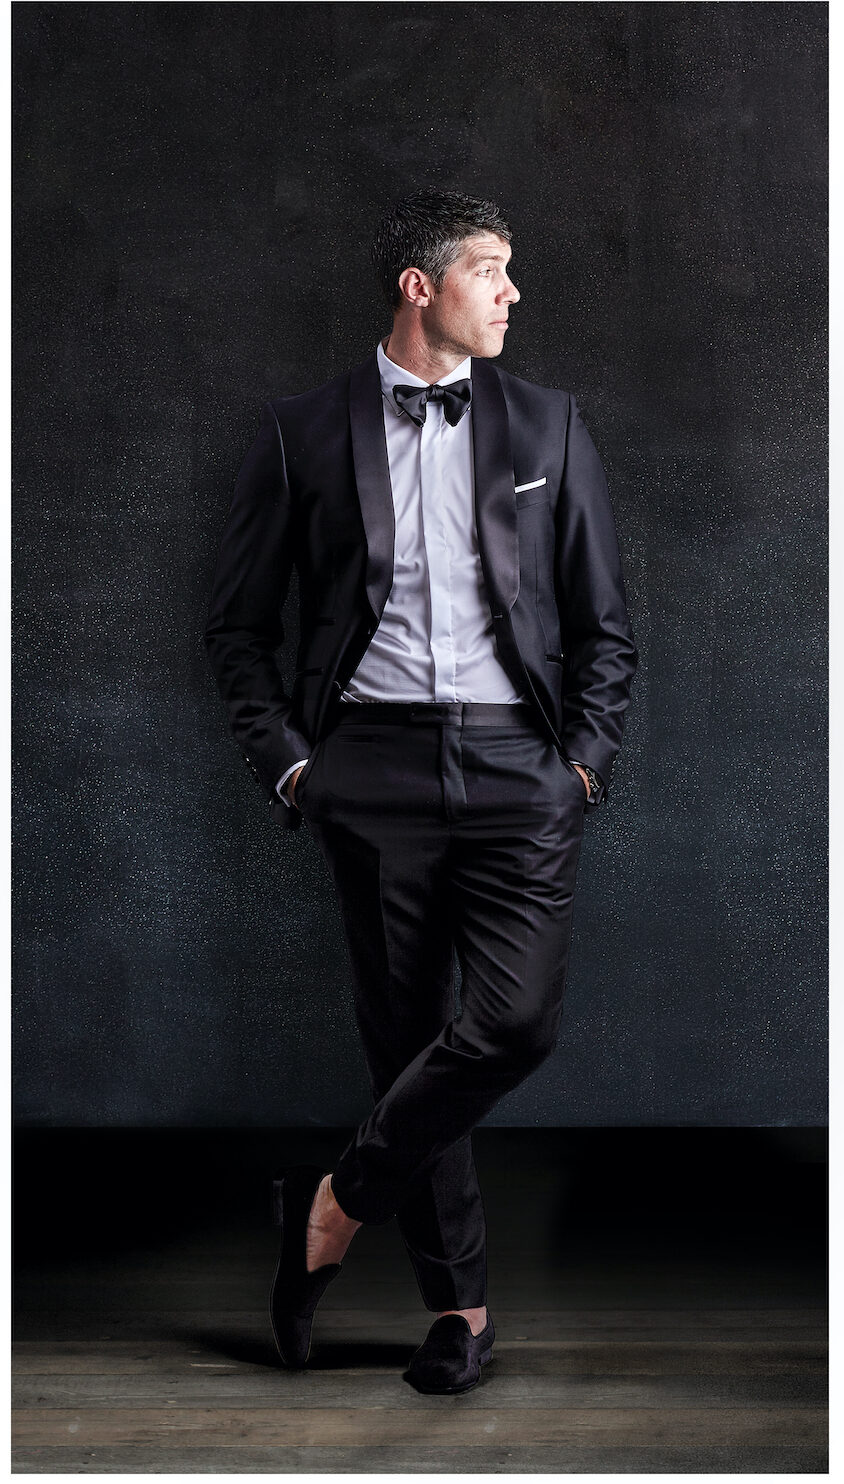 Be Well Suited | NL Suits